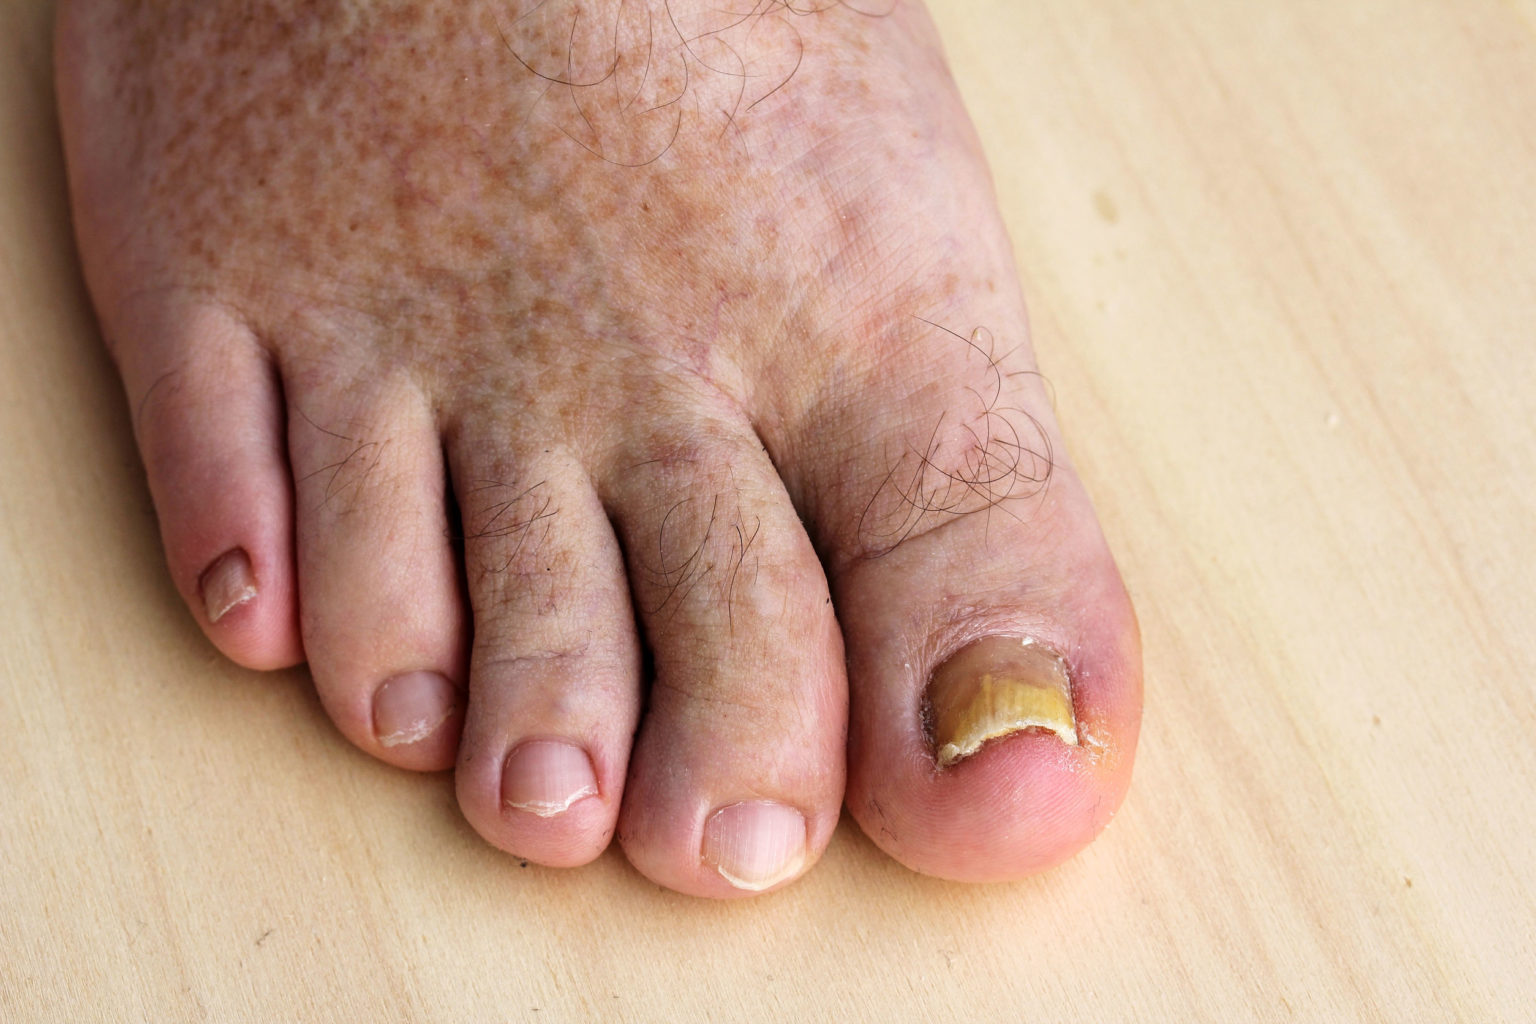 8. Foot Nail Color Changes and Fungal Infections - wide 5